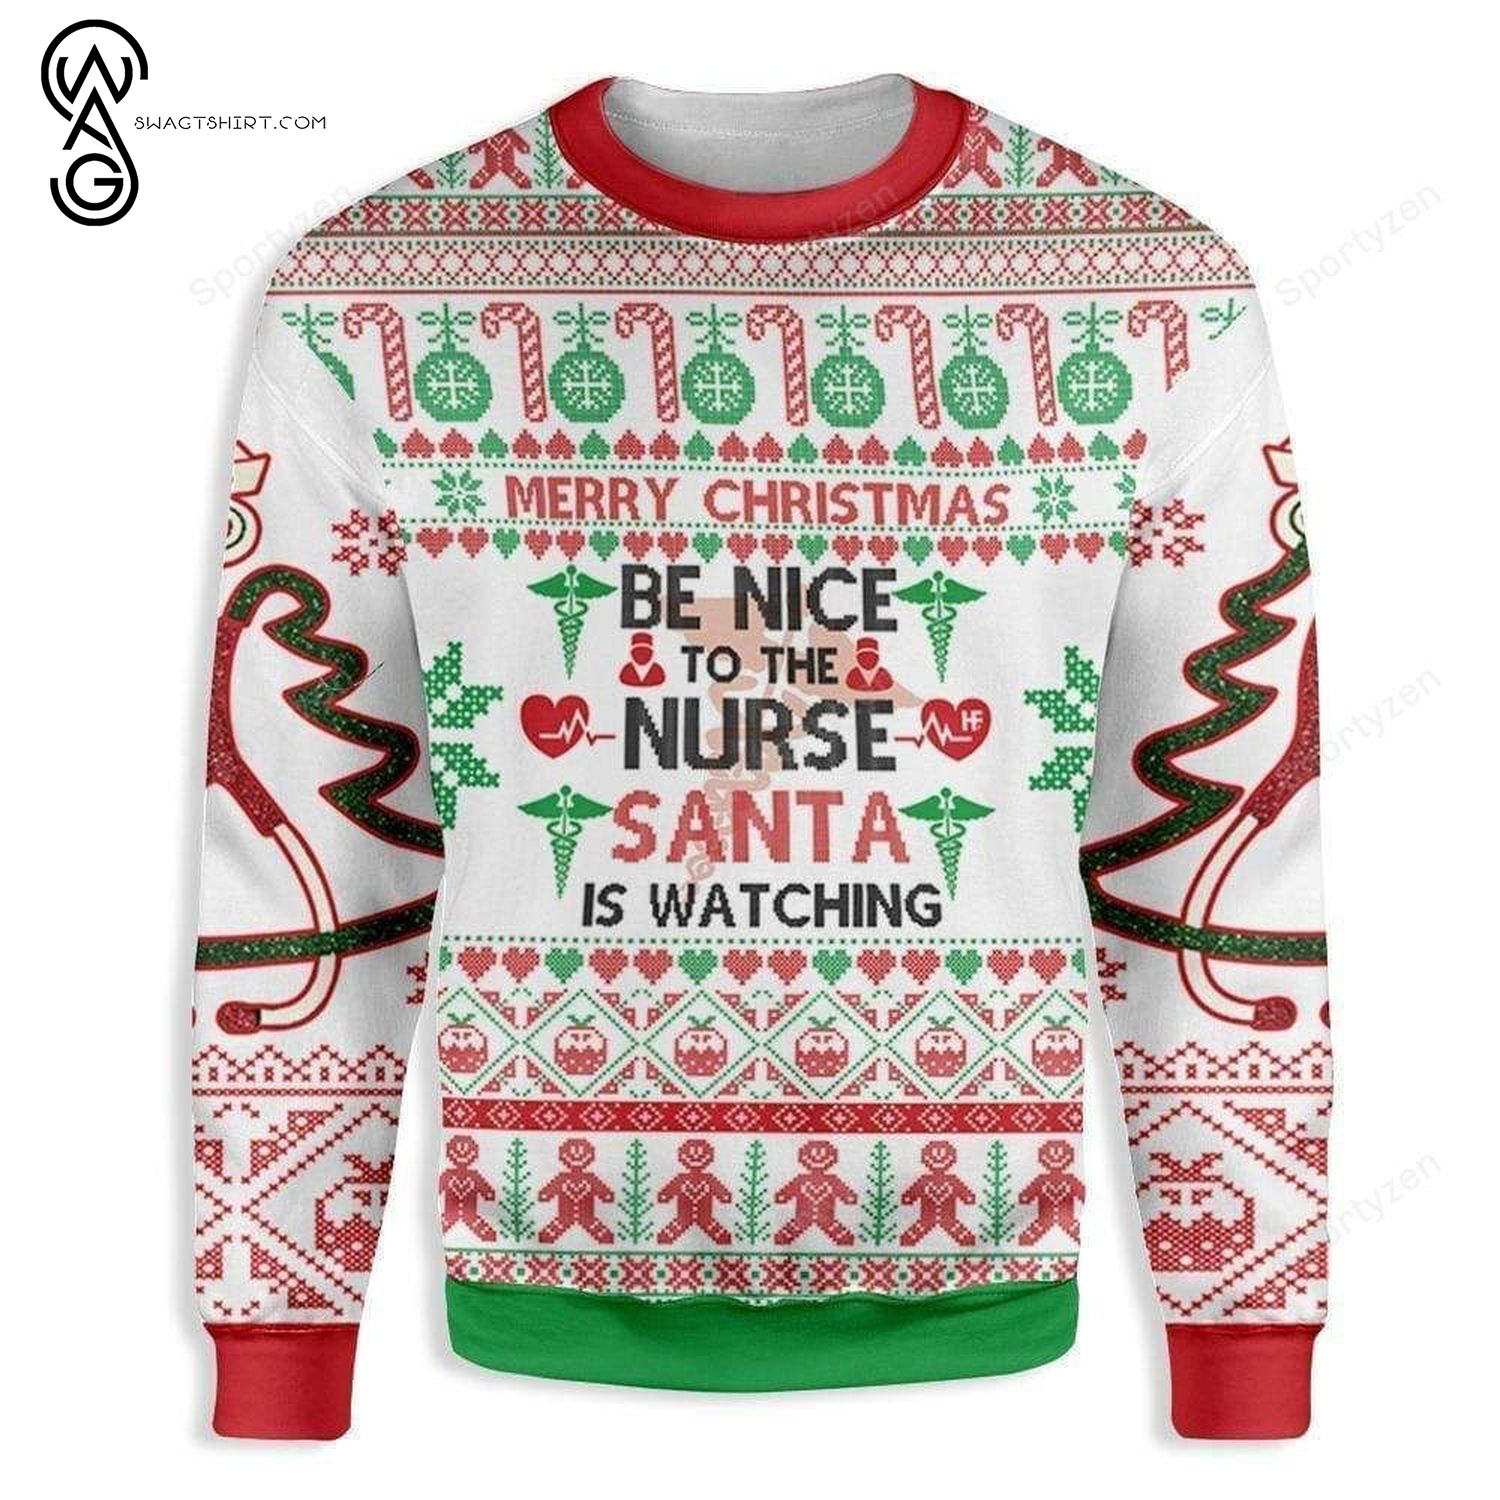 Merry Christmas Be Nice to The Nurse Santa is Watching Ugly Christmas Sweater